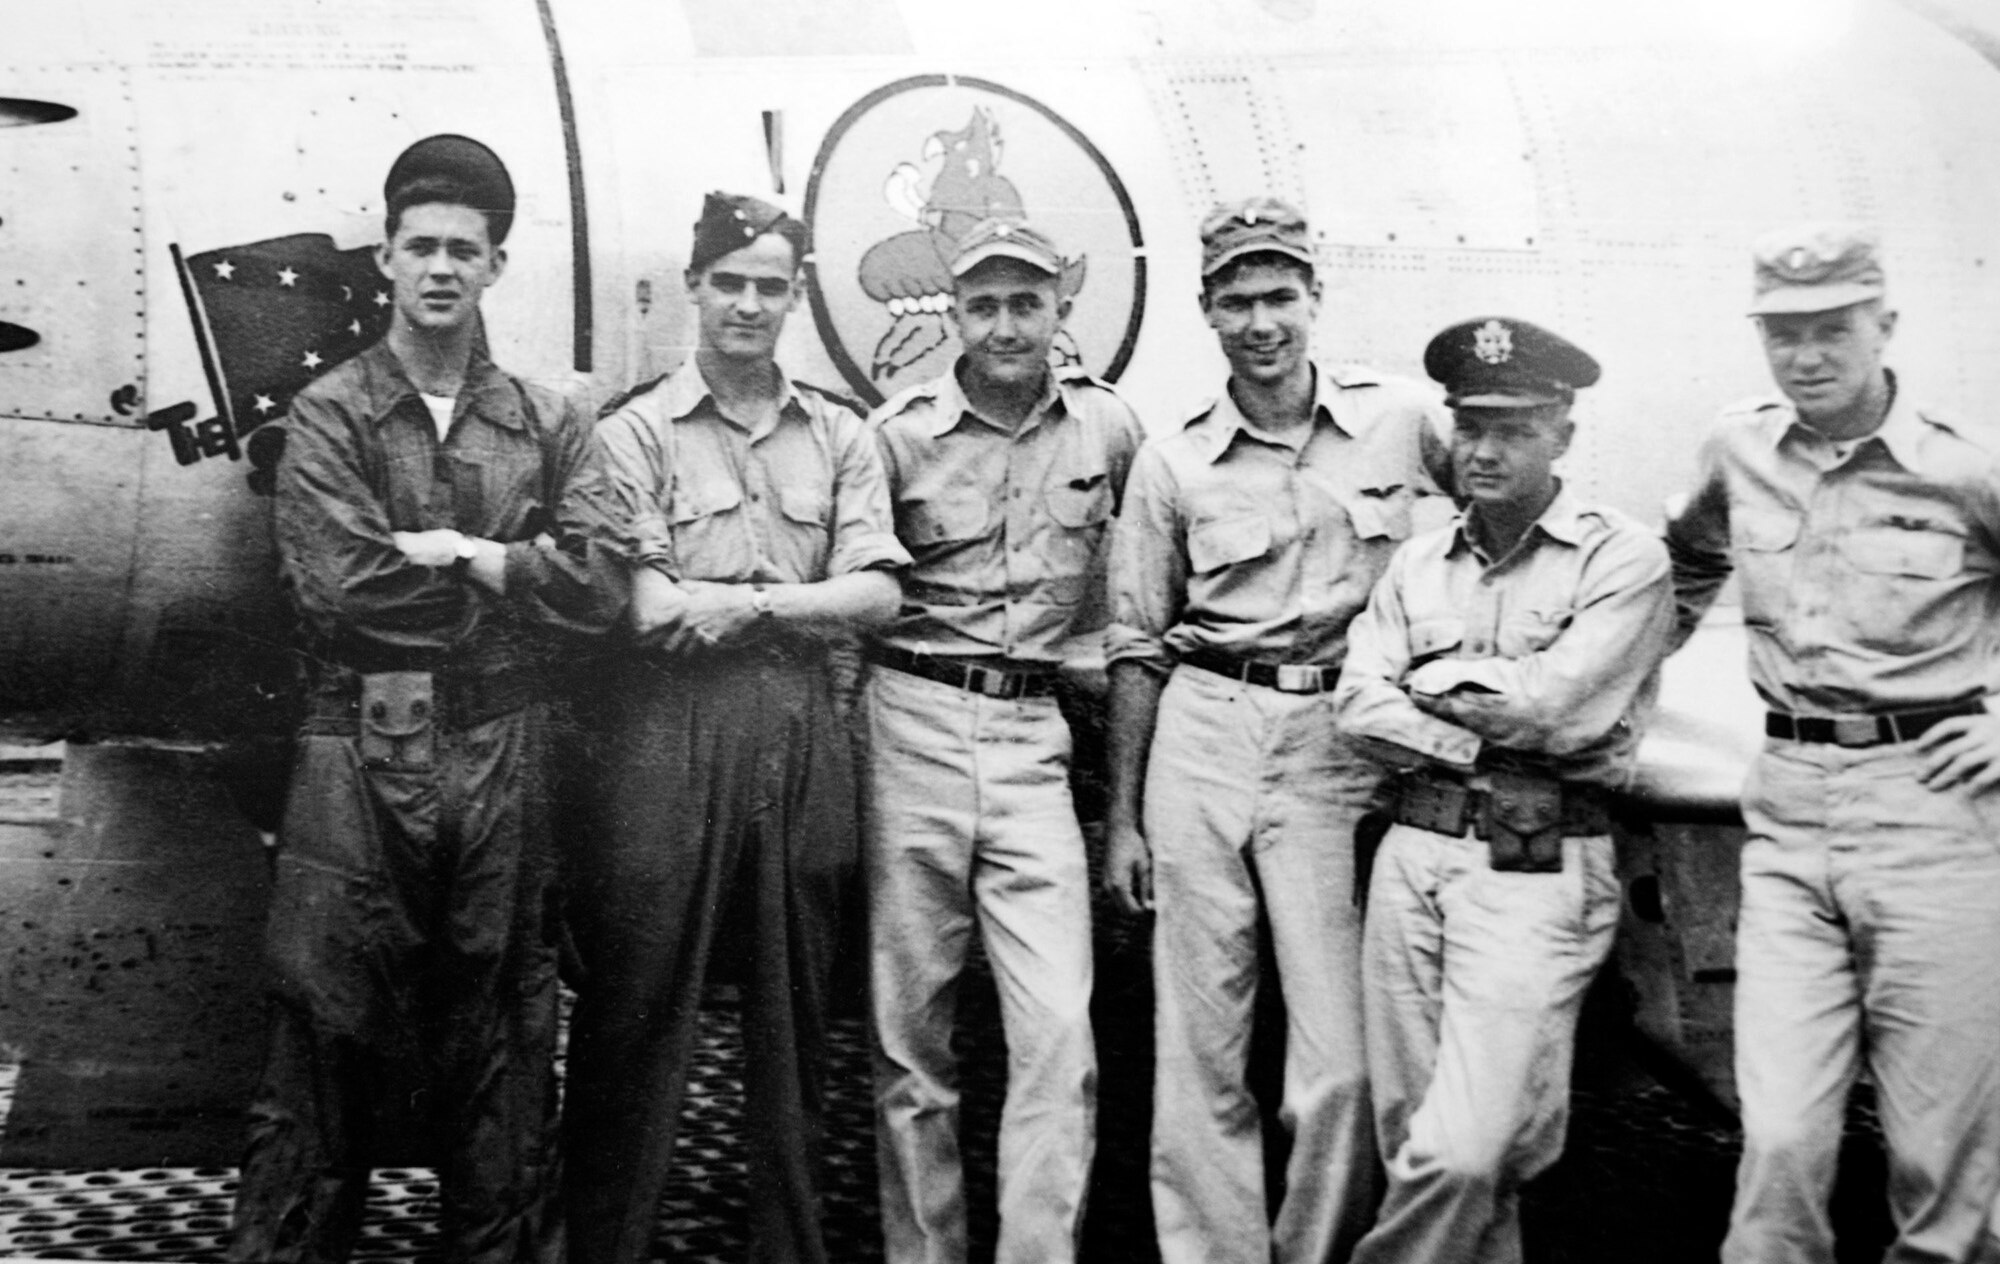 Retired Lt. Gen. Cleveland (third from right) was deployed to South Korea in March 1952, where he flew F-86s as a flight commander with the 4th Fighter Interceptor Wing at Kimpo Air Base. Fifty-five years after the Korean War, the Air Force has recognized General Cleveland as a fighter ace for his accomplishments of five MiG-15s kills and one probable. (U.S. Air Force photo/Staff Sgt. Bennie J. Davis III)
